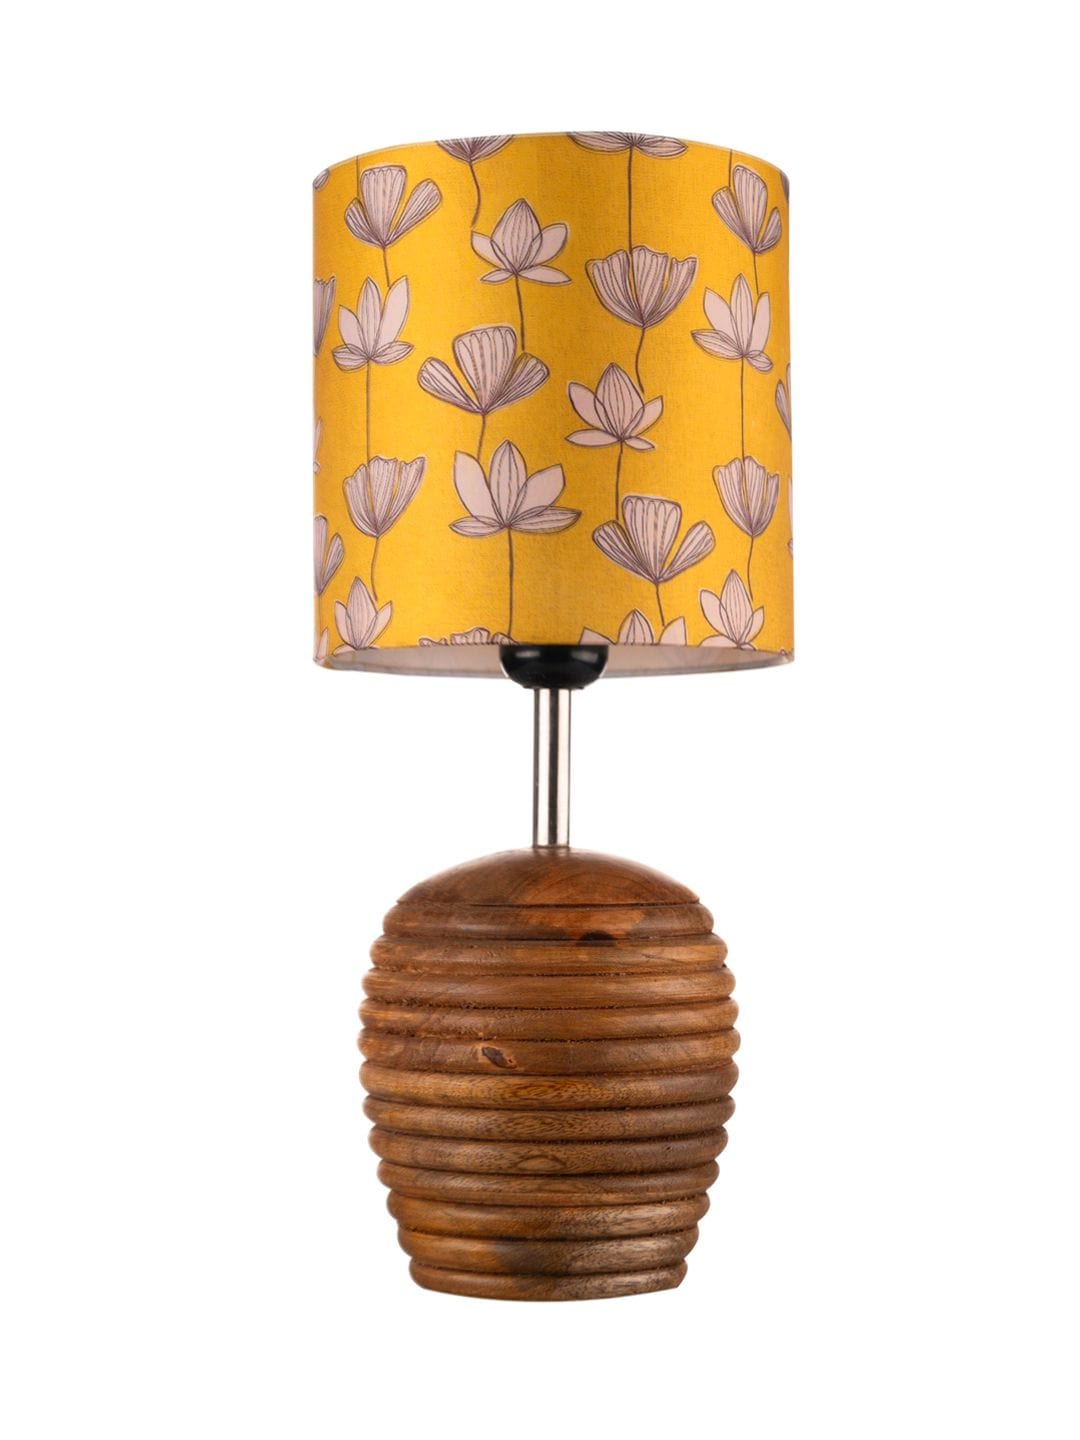 Stripped Brown Lamp with Mustard Flora multicolor shade